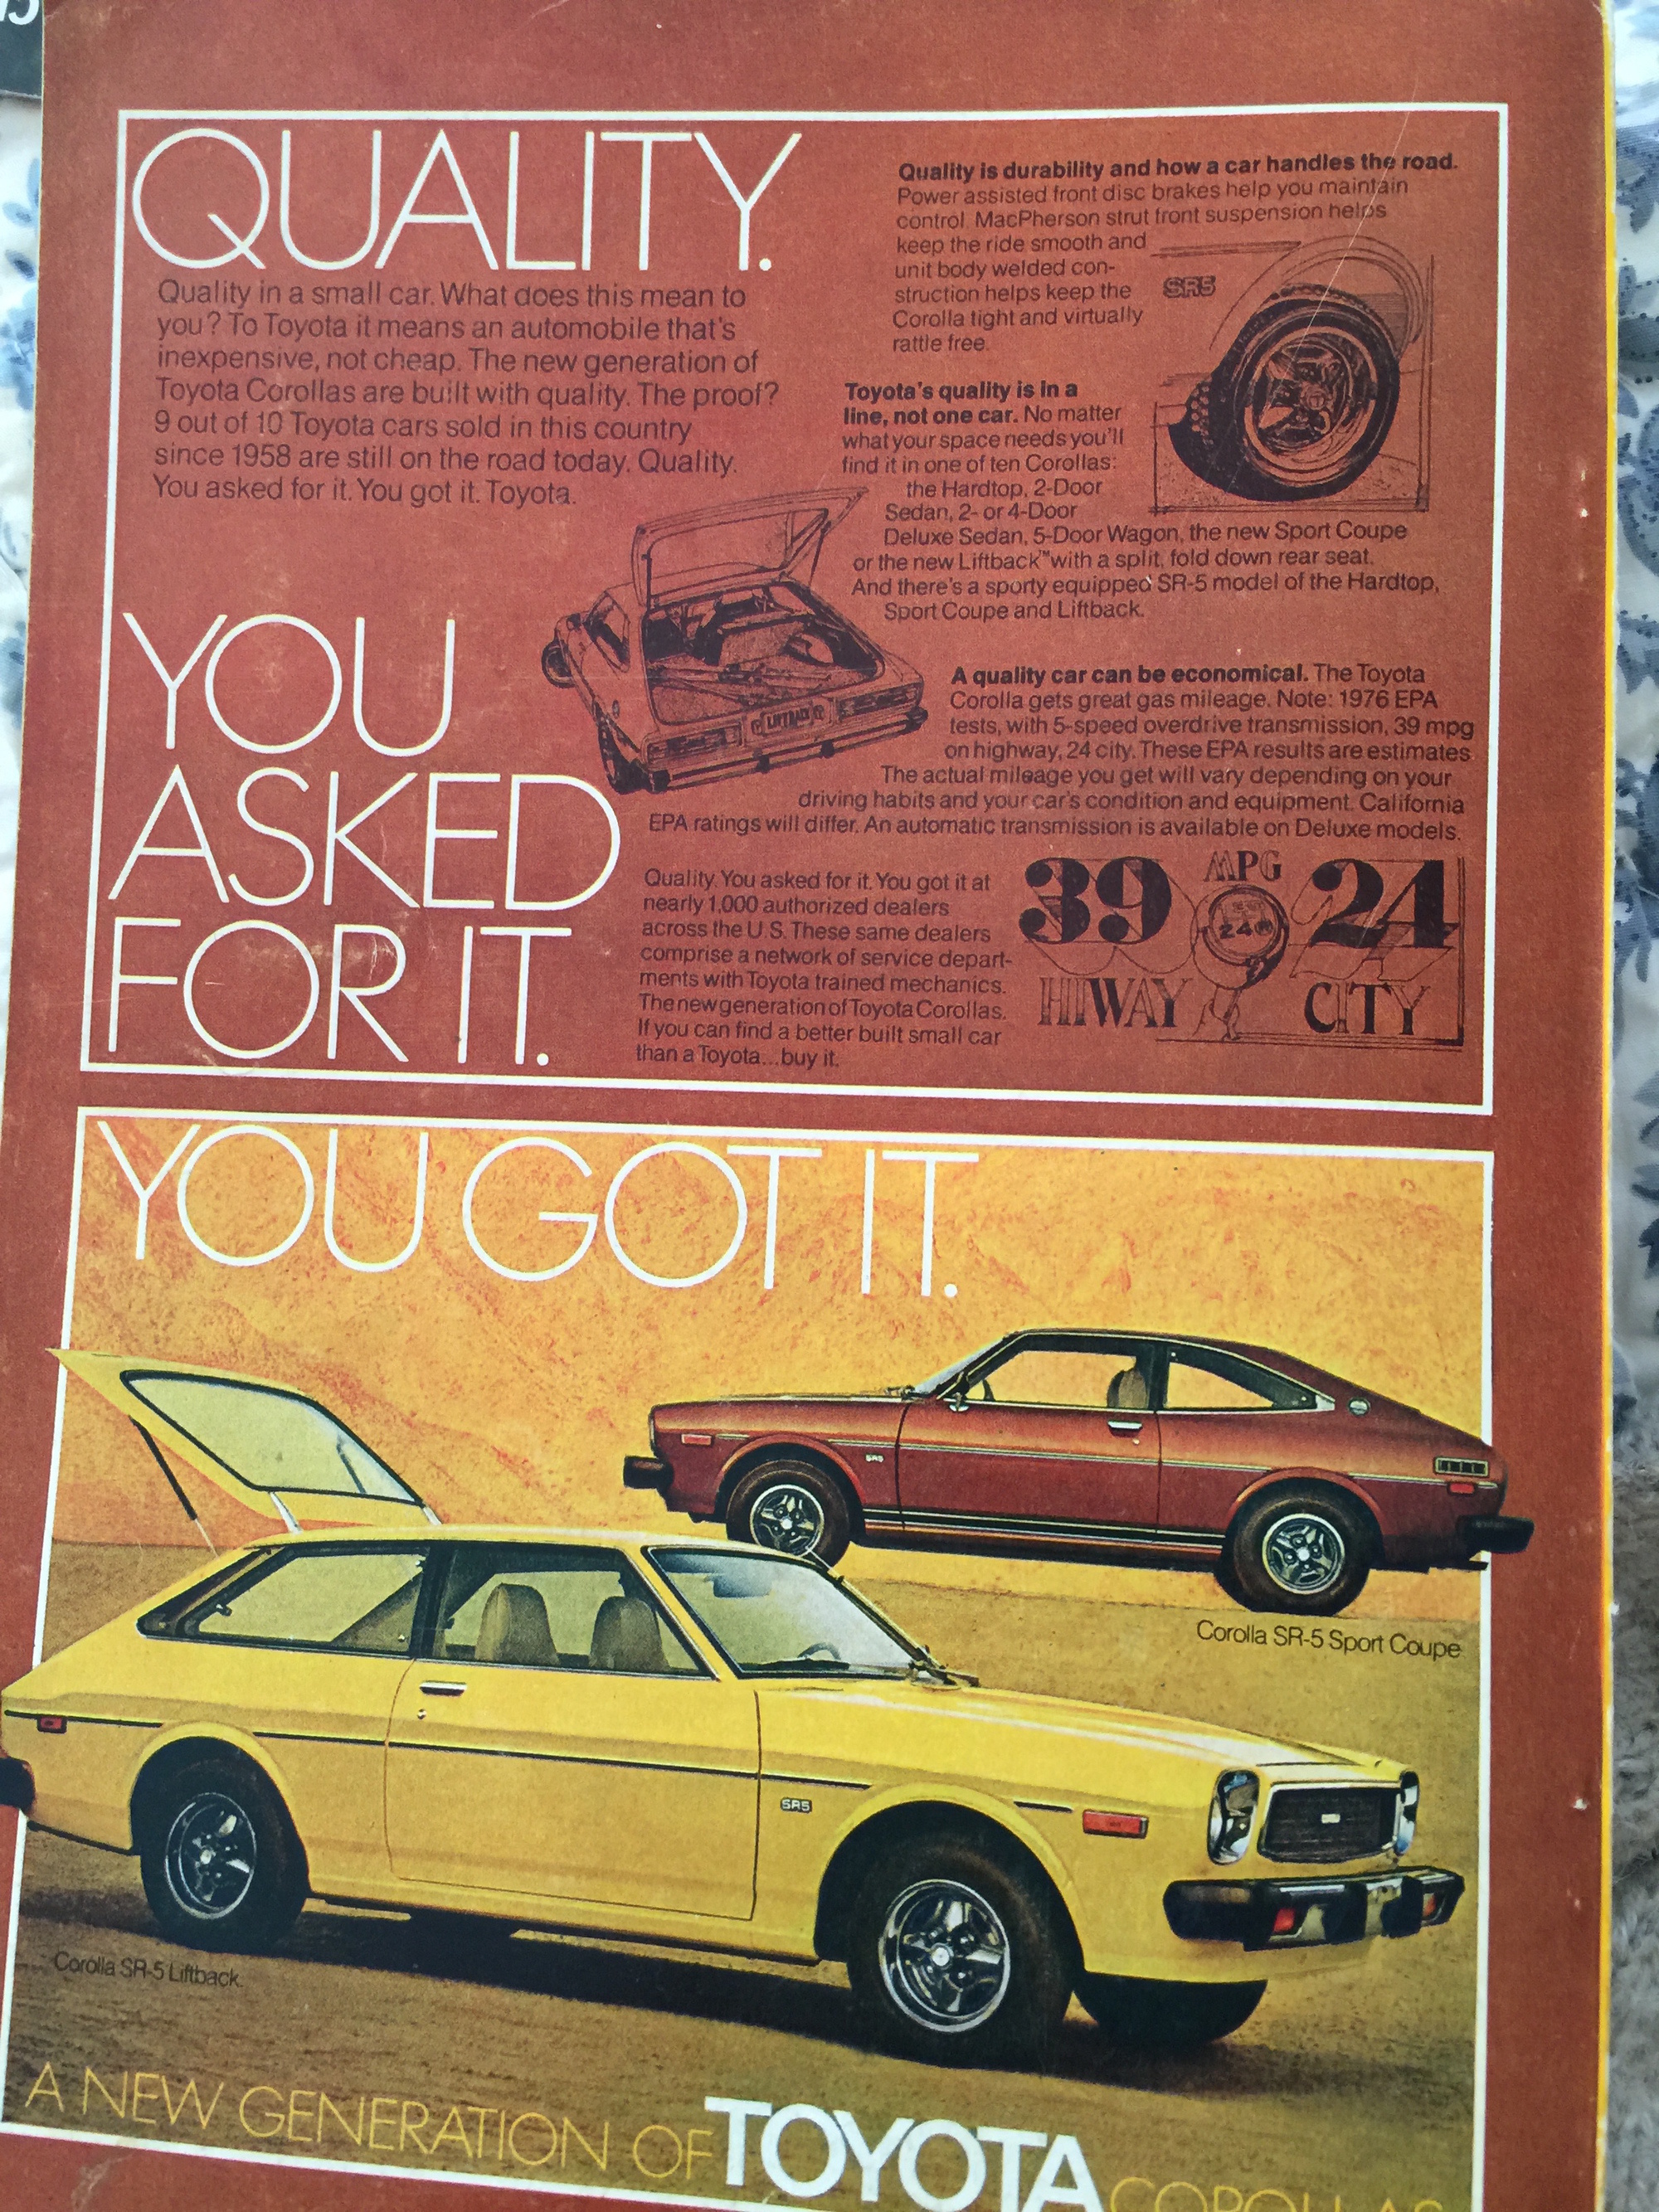 A cool old Toyota Corolla advertisement.